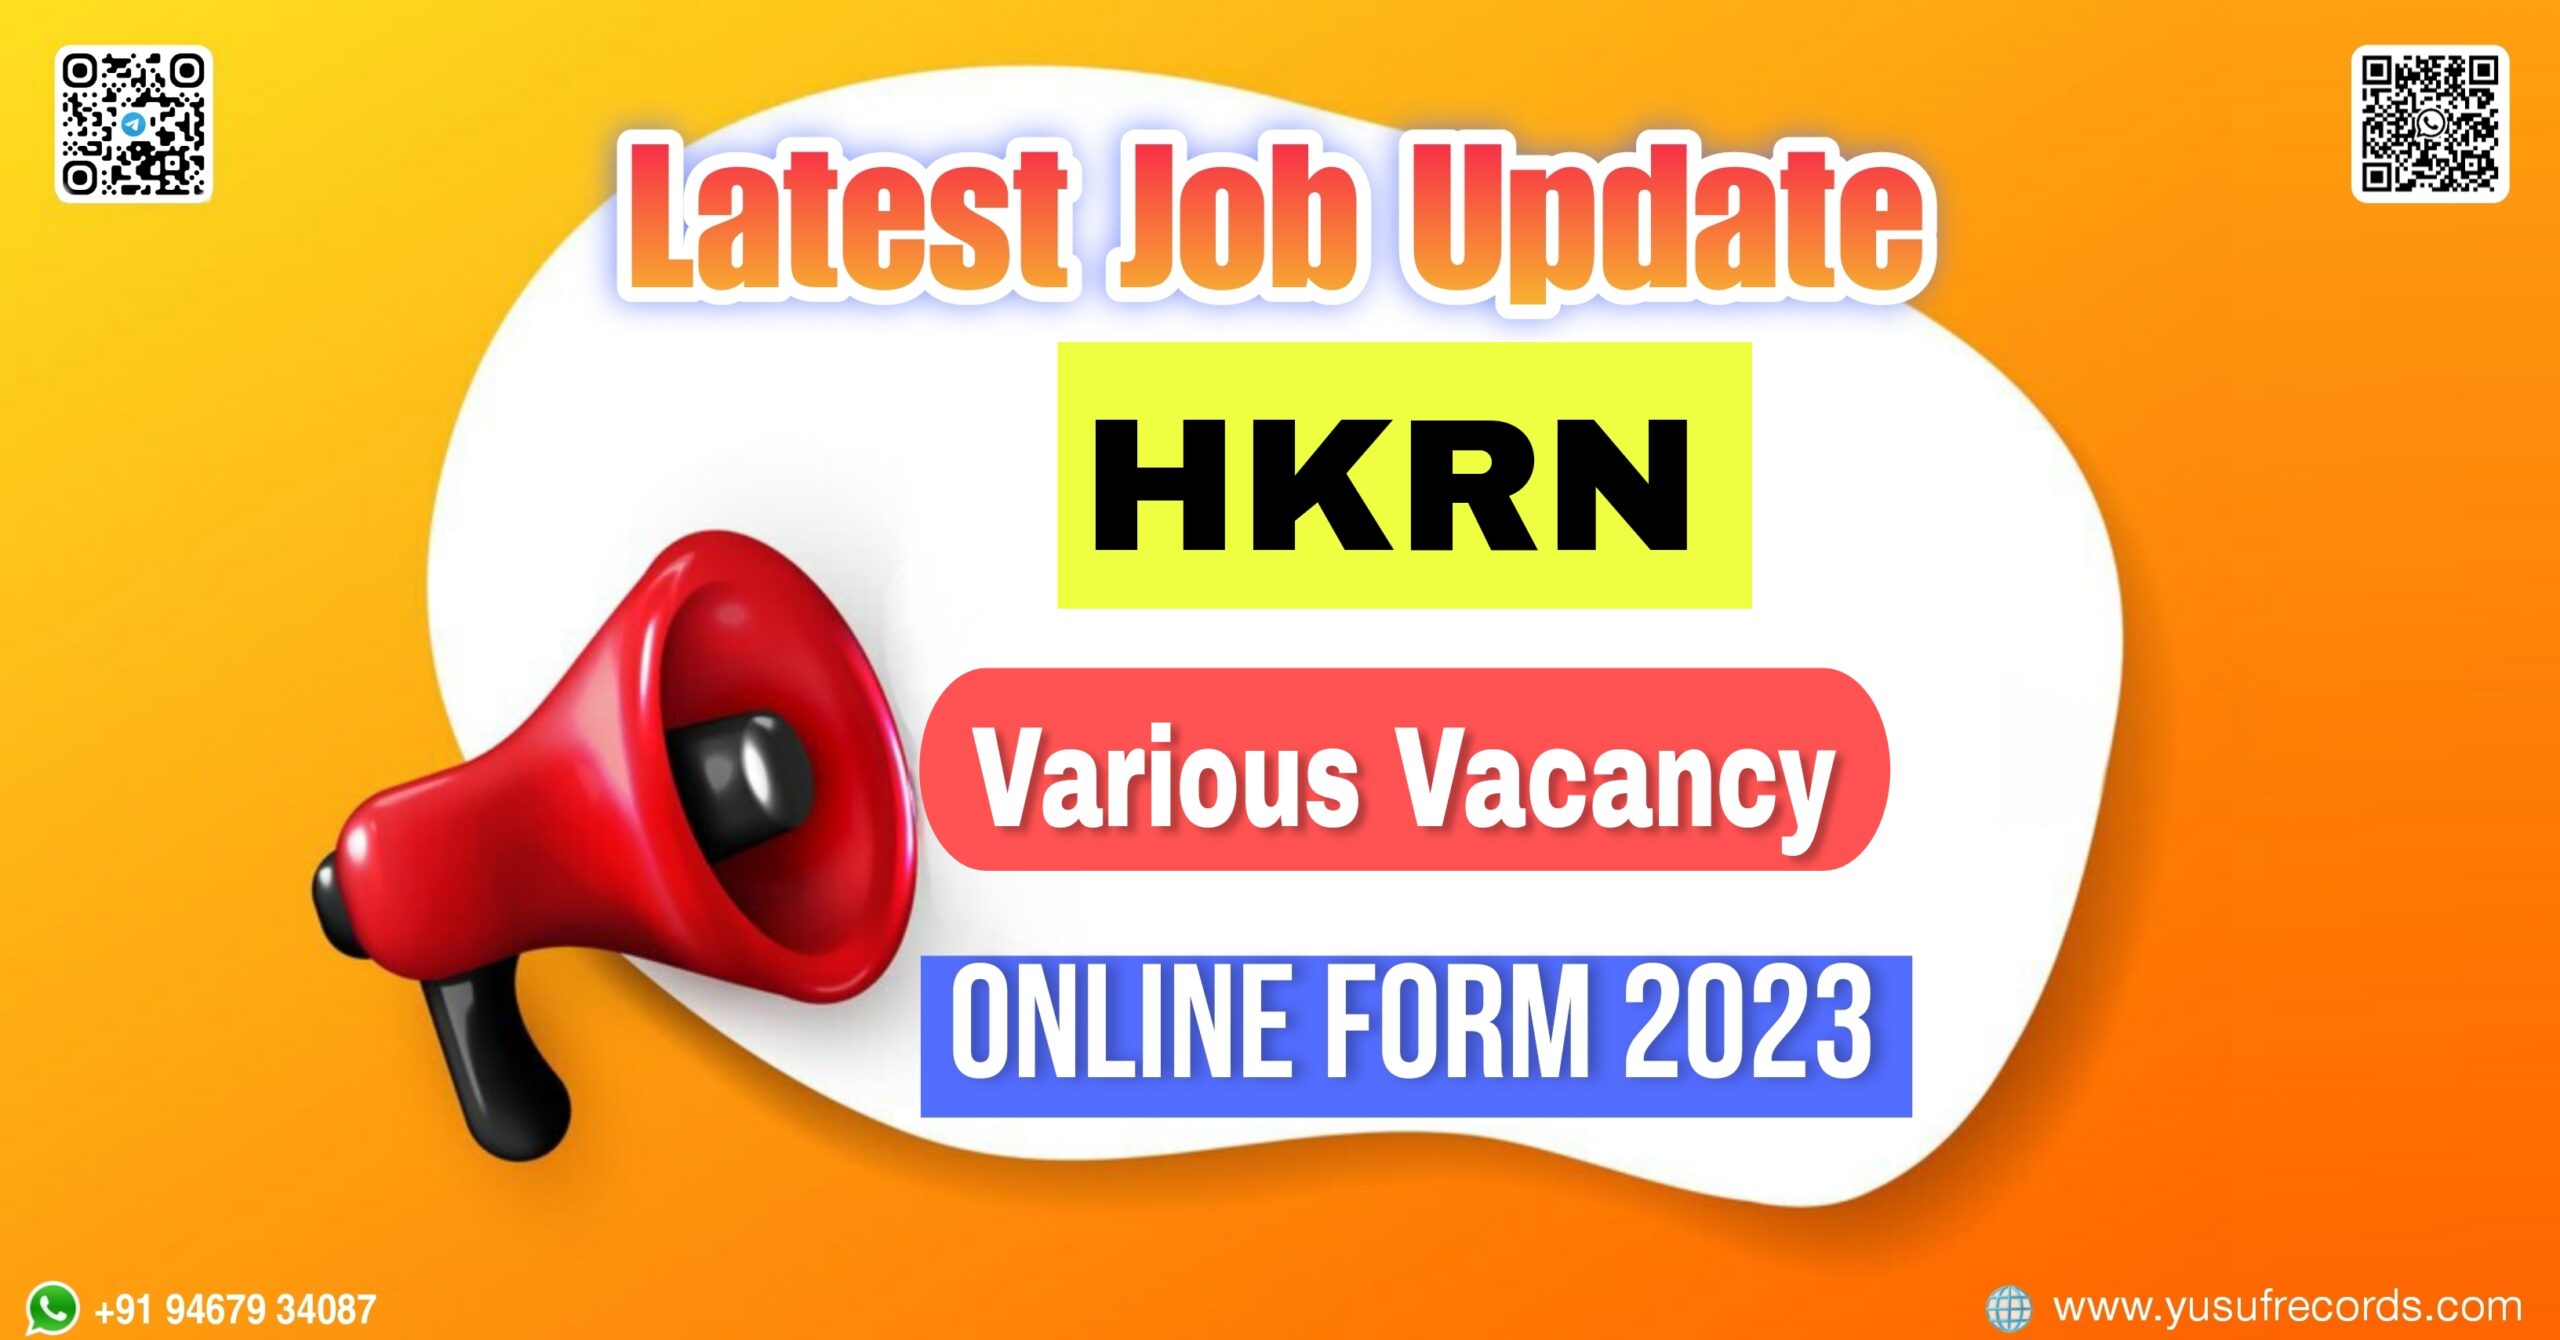 HKRN Various Vacancy Online Form 2023 yusufrecords